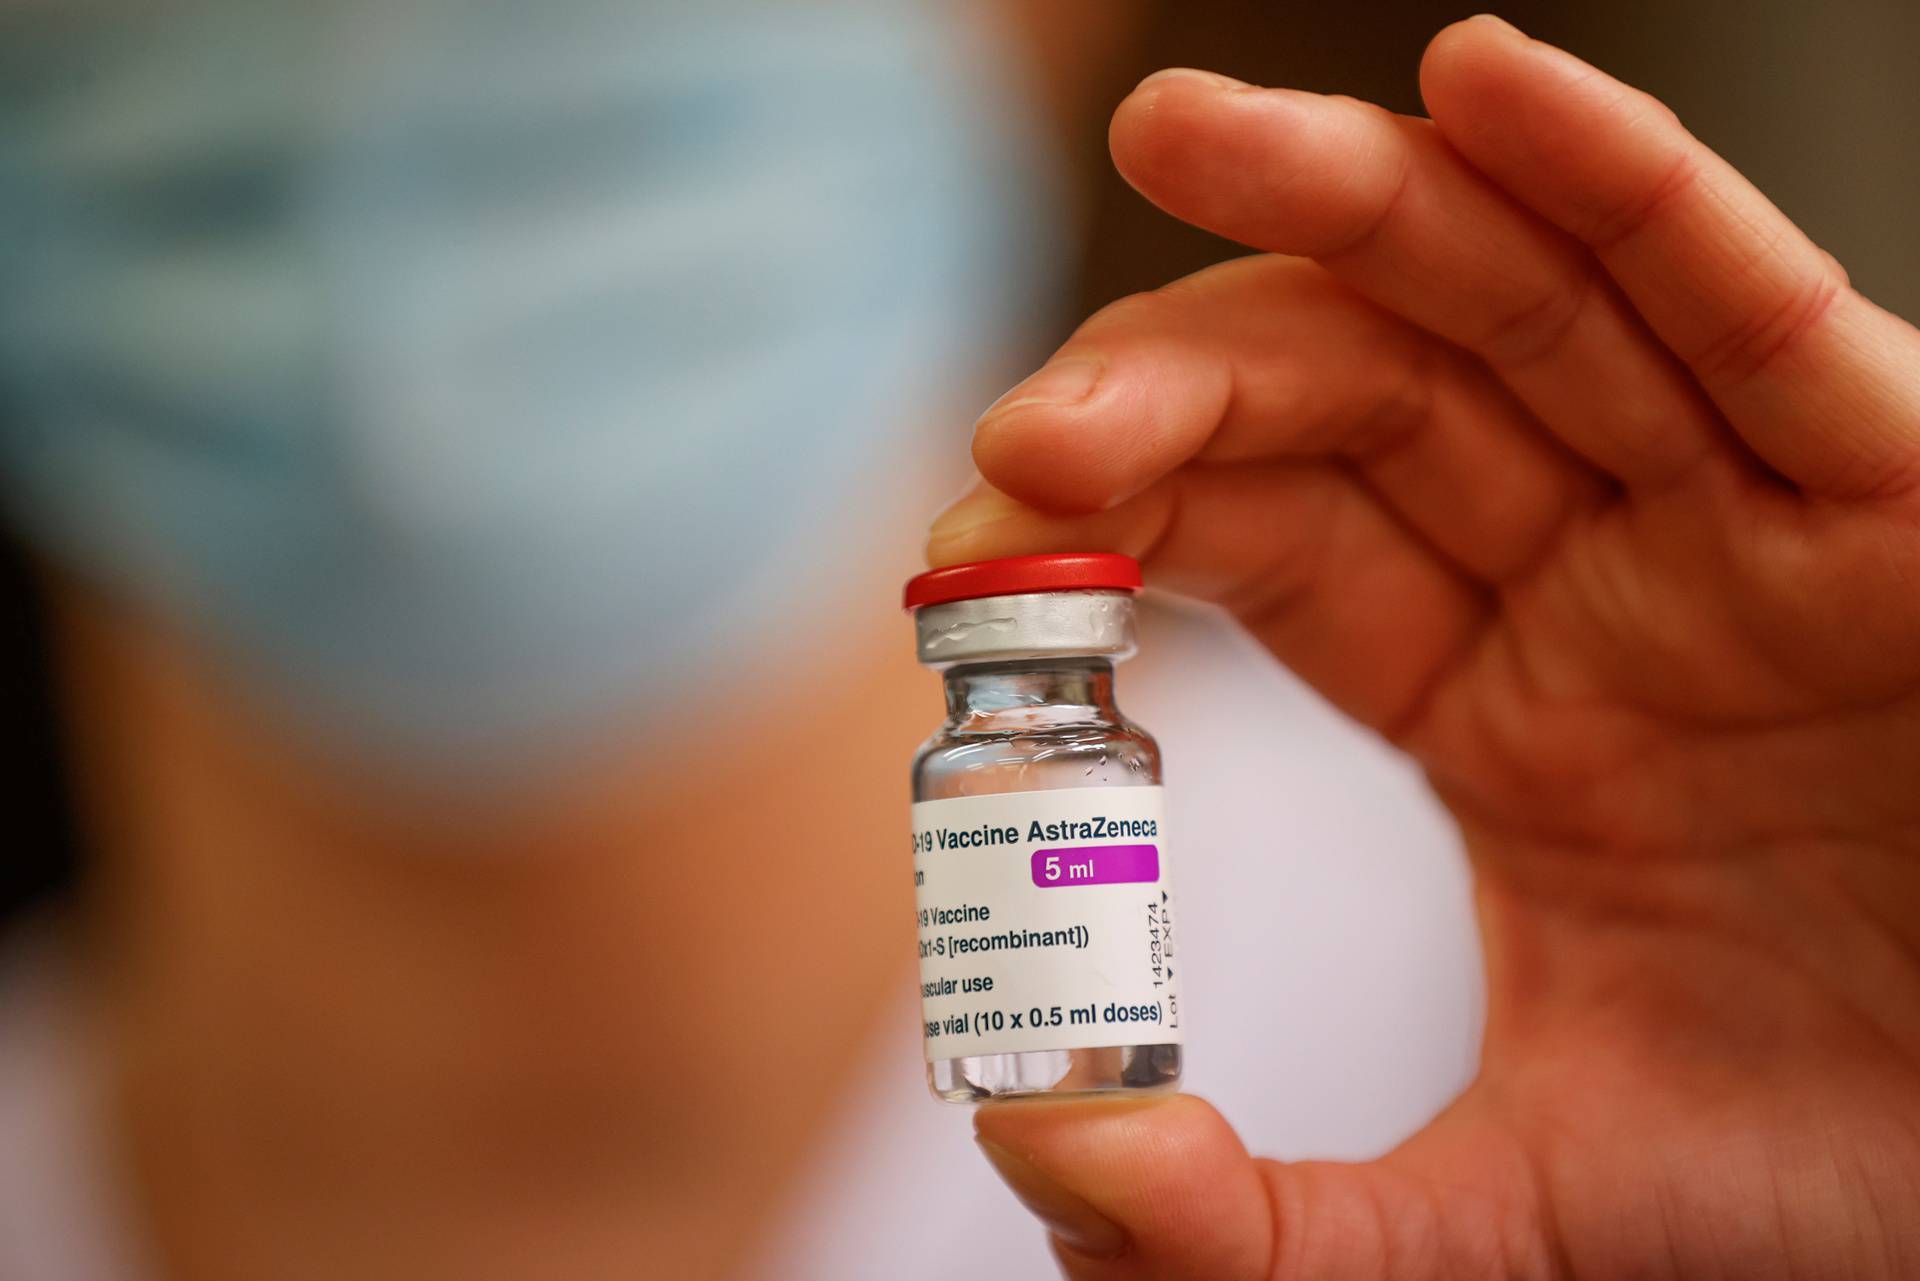 A member of the medical staff holds a vial of the AstraZeneca-Oxford COVID-19 vaccine, in Melun